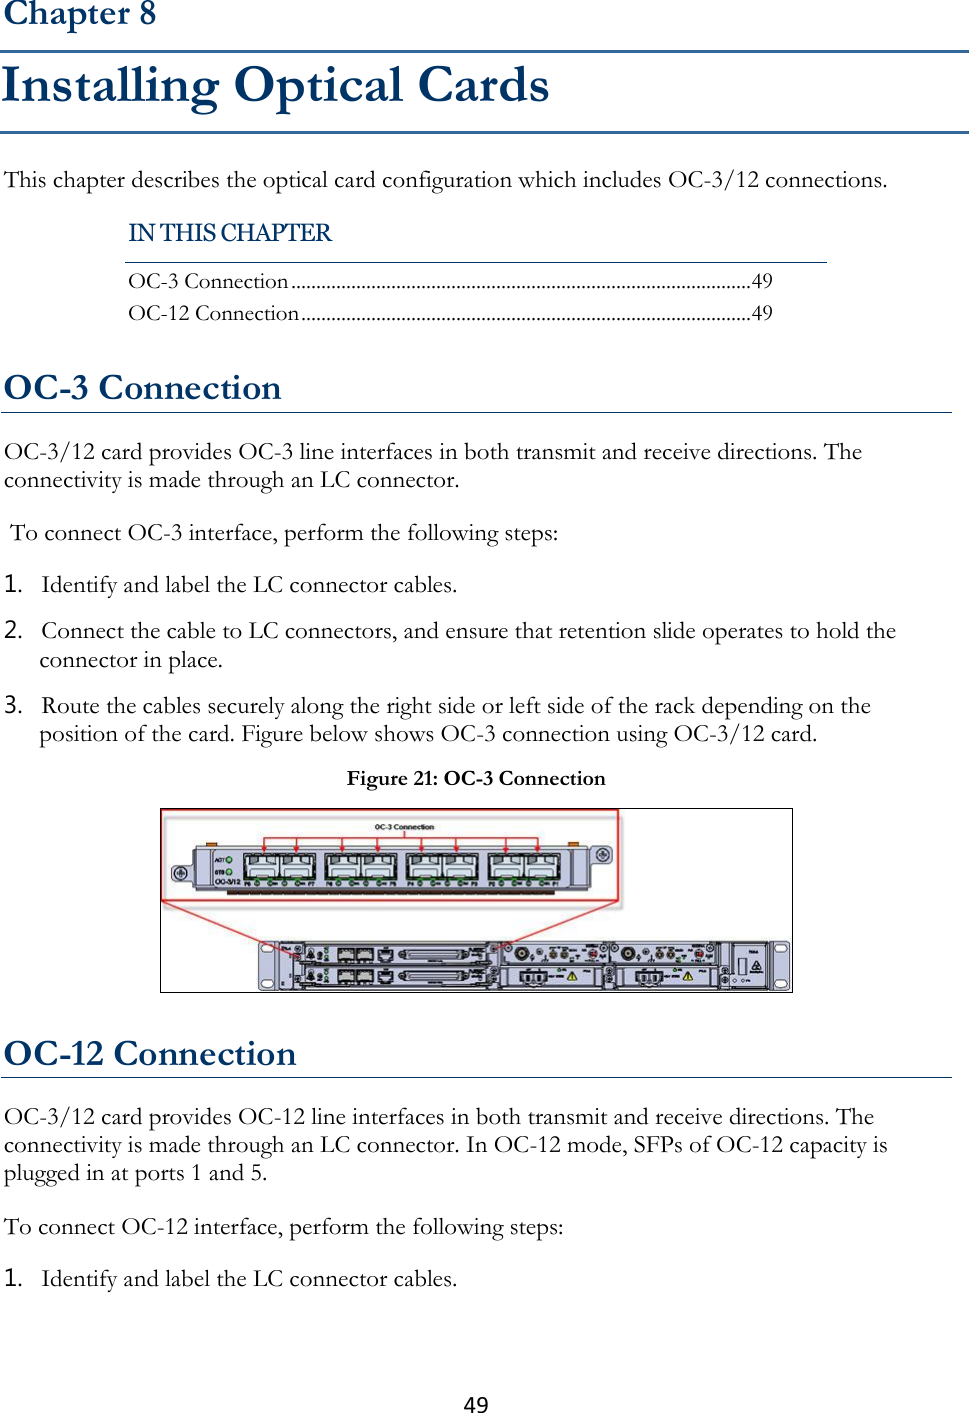 49  This chapter describes the optical card configuration which includes OC-3/12 connections.   OC-3 Connection OC-3/12 card provides OC-3 line interfaces in both transmit and receive directions. The connectivity is made through an LC connector.  To connect OC-3 interface, perform the following steps: 1. Identify and label the LC connector cables. 2. Connect the cable to LC connectors, and ensure that retention slide operates to hold the connector in place. 3. Route the cables securely along the right side or left side of the rack depending on the position of the card. Figure below shows OC-3 connection using OC-3/12 card.  OC-12 Connection OC-3/12 card provides OC-12 line interfaces in both transmit and receive directions. The connectivity is made through an LC connector. In OC-12 mode, SFPs of OC-12 capacity is plugged in at ports 1 and 5. To connect OC-12 interface, perform the following steps: 1. Identify and label the LC connector cables. Chapter 8 Installing Optical Cards IN THIS CHAPTER OC-3 Connection ............................................................................................ 49 OC-12 Connection .......................................................................................... 49 Figure 21: OC-3 Connection  